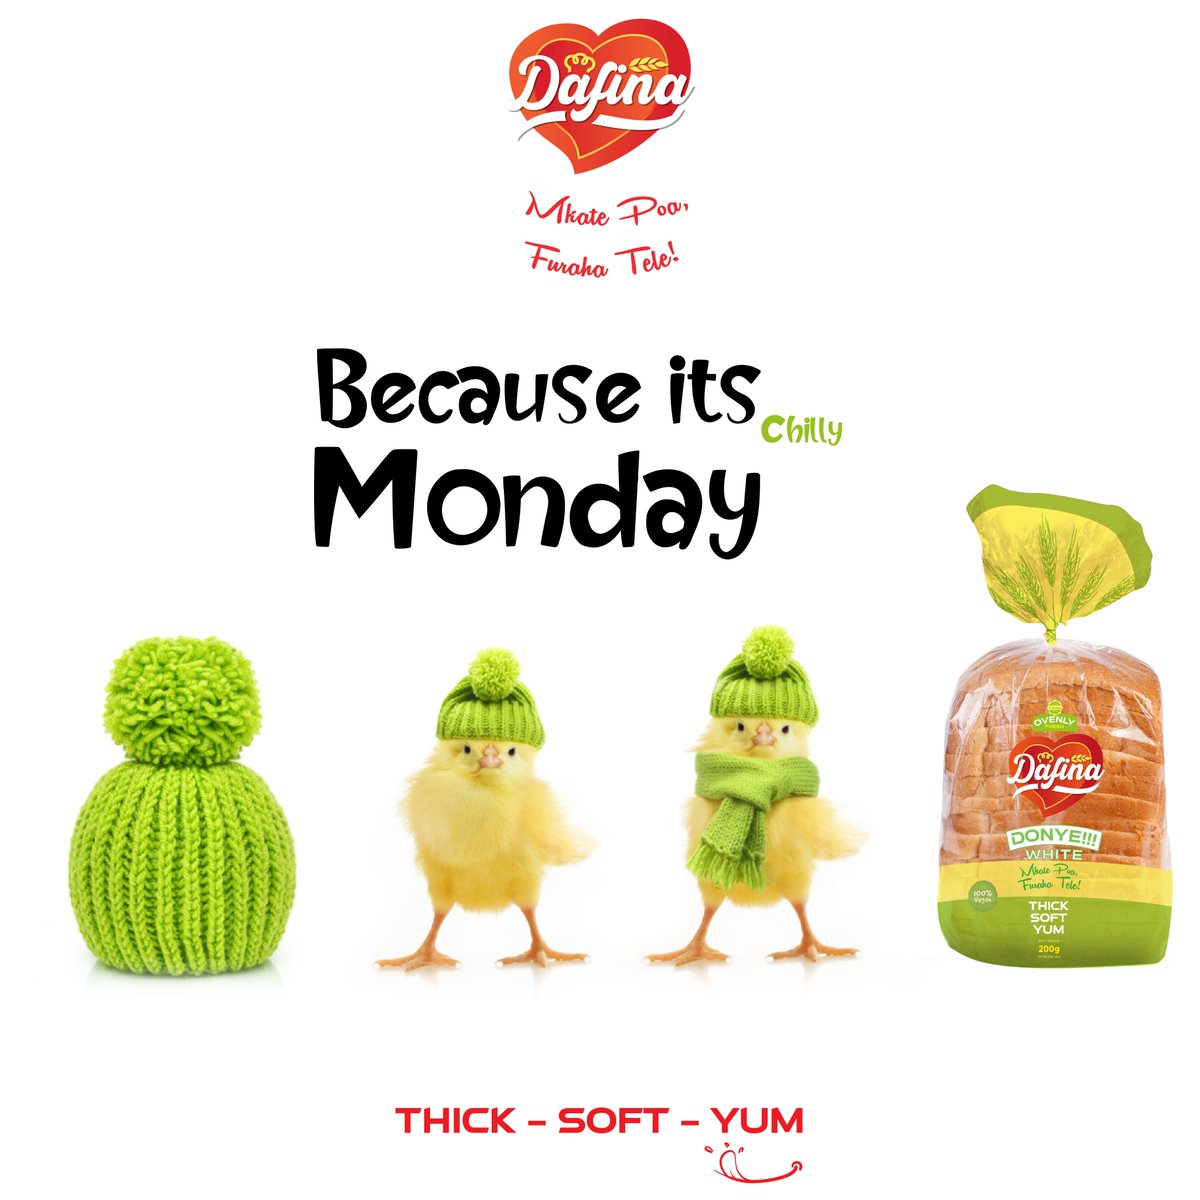 Here is the Morn,
A chilly Morn,
A Monday Morn
A Dafina Monday Morn.

There is bread then there is Dafina.

Just a call 0718111333 and that's all.

#TeamDafina  #dafinabread #healthy #premium  #vegan100 #bread #proudlykenyan #lowcalories #breakfast #keepyourcityclean♻️🌎 #monday